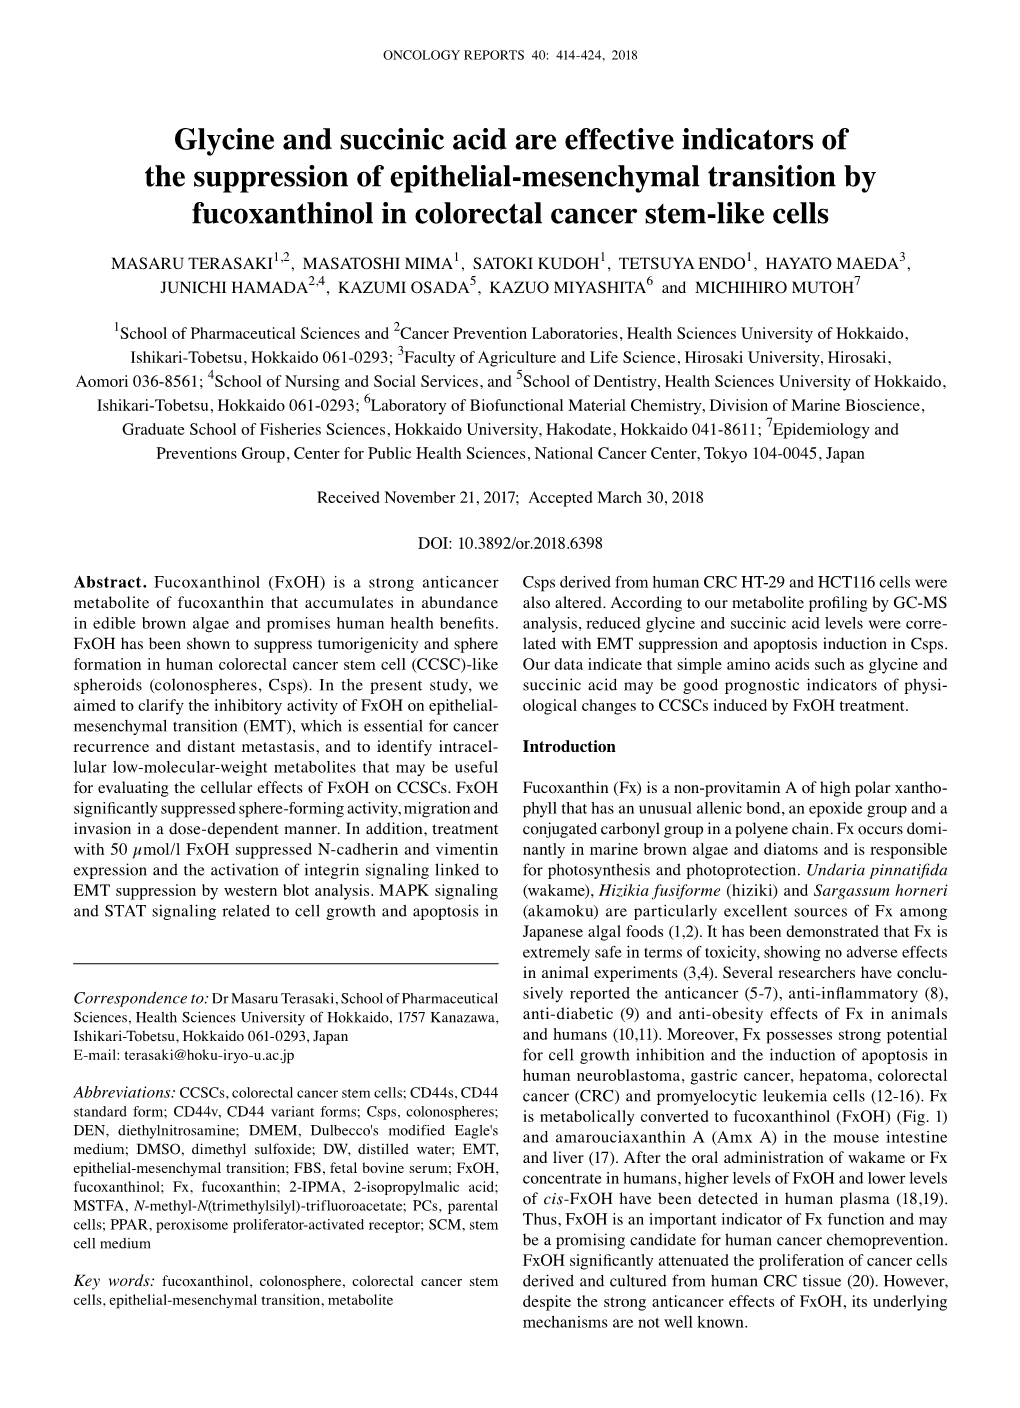 Glycine and Succinic Acid Are Effective Indicators of the Suppression of Epithelial-Mesenchymal Transition by Fucoxanthinol in Colorectal Cancer Stem-Like Cells